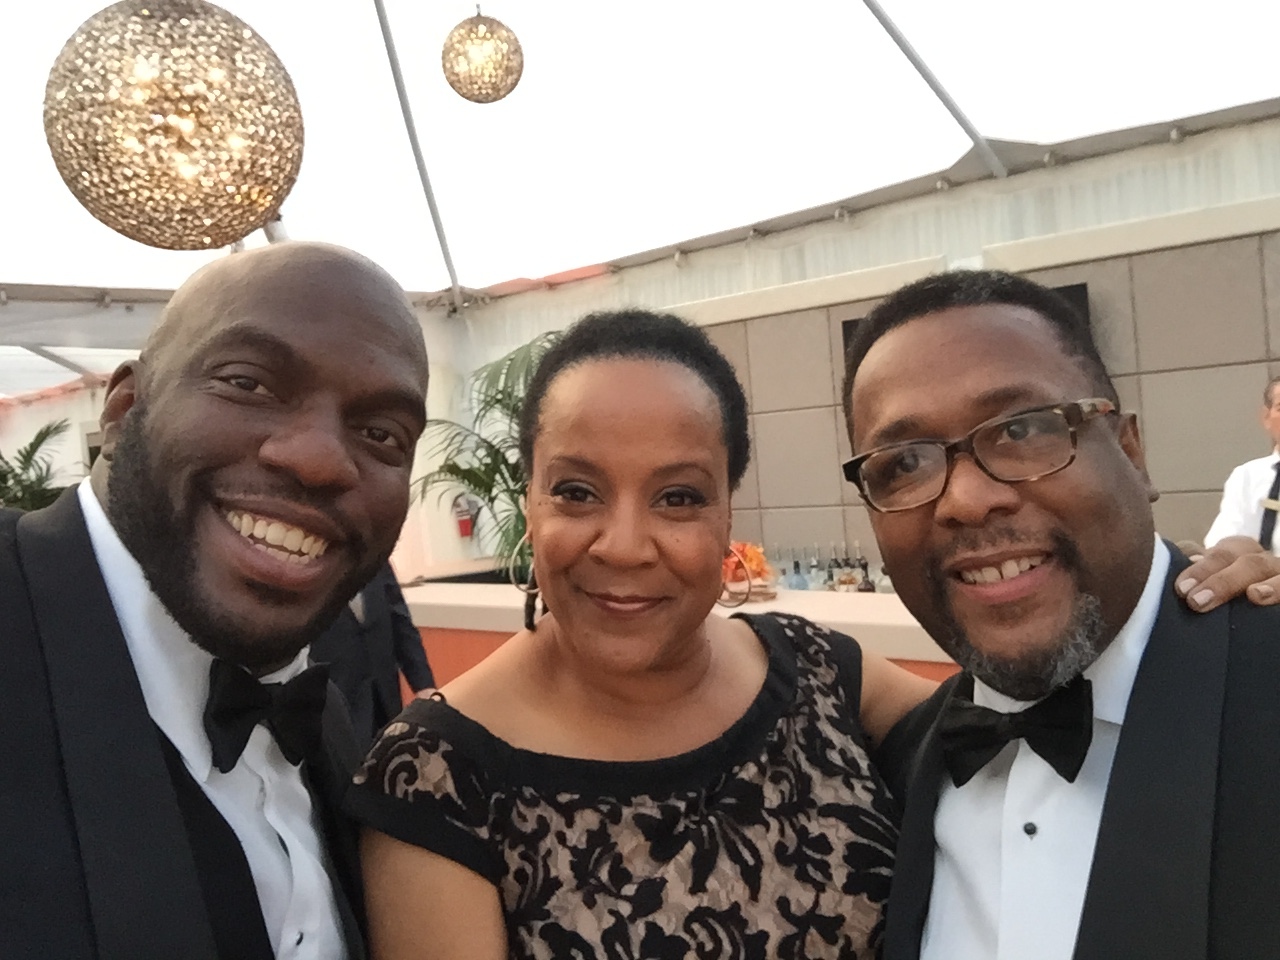 Paramount Golden Globe Party with Selma cast